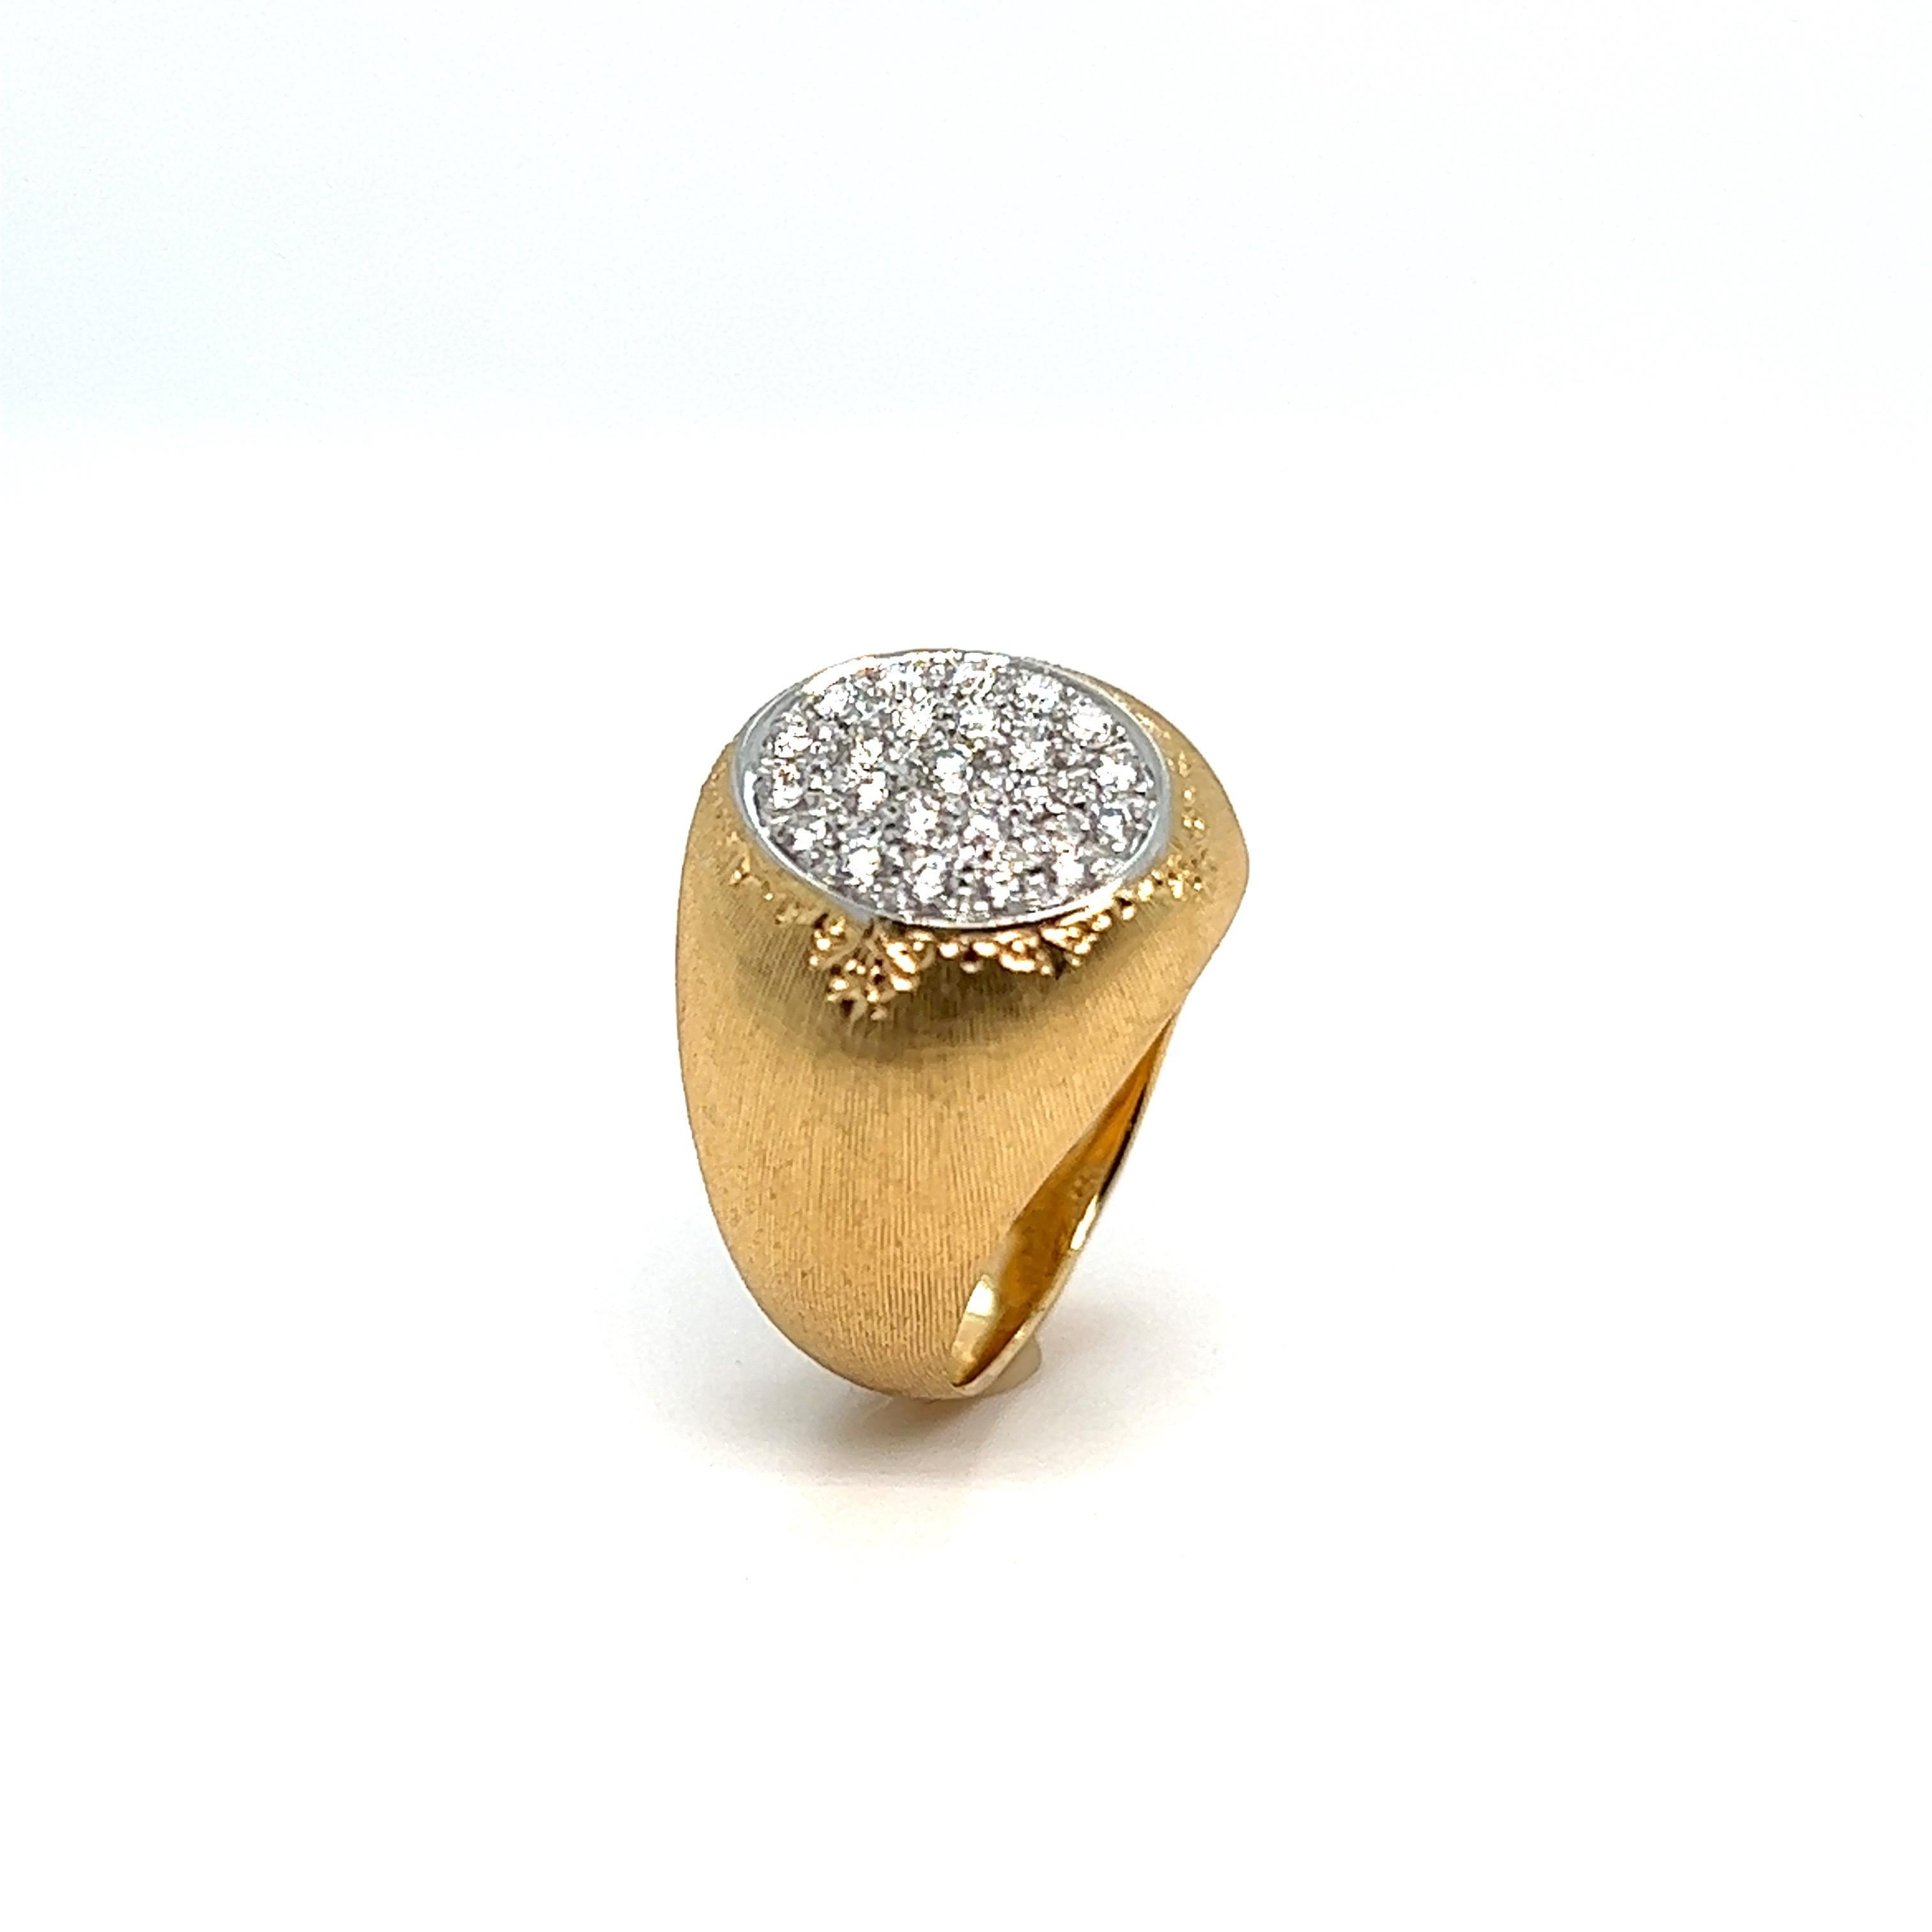 Discover a magnificent brushed French signet ring lightly chased with flowers topped with pavé diamonds, a truly exceptional piece of jewelry that embodies the Baroque style. Crafted with care and expertise, this 18-carat yellow gold signet ring